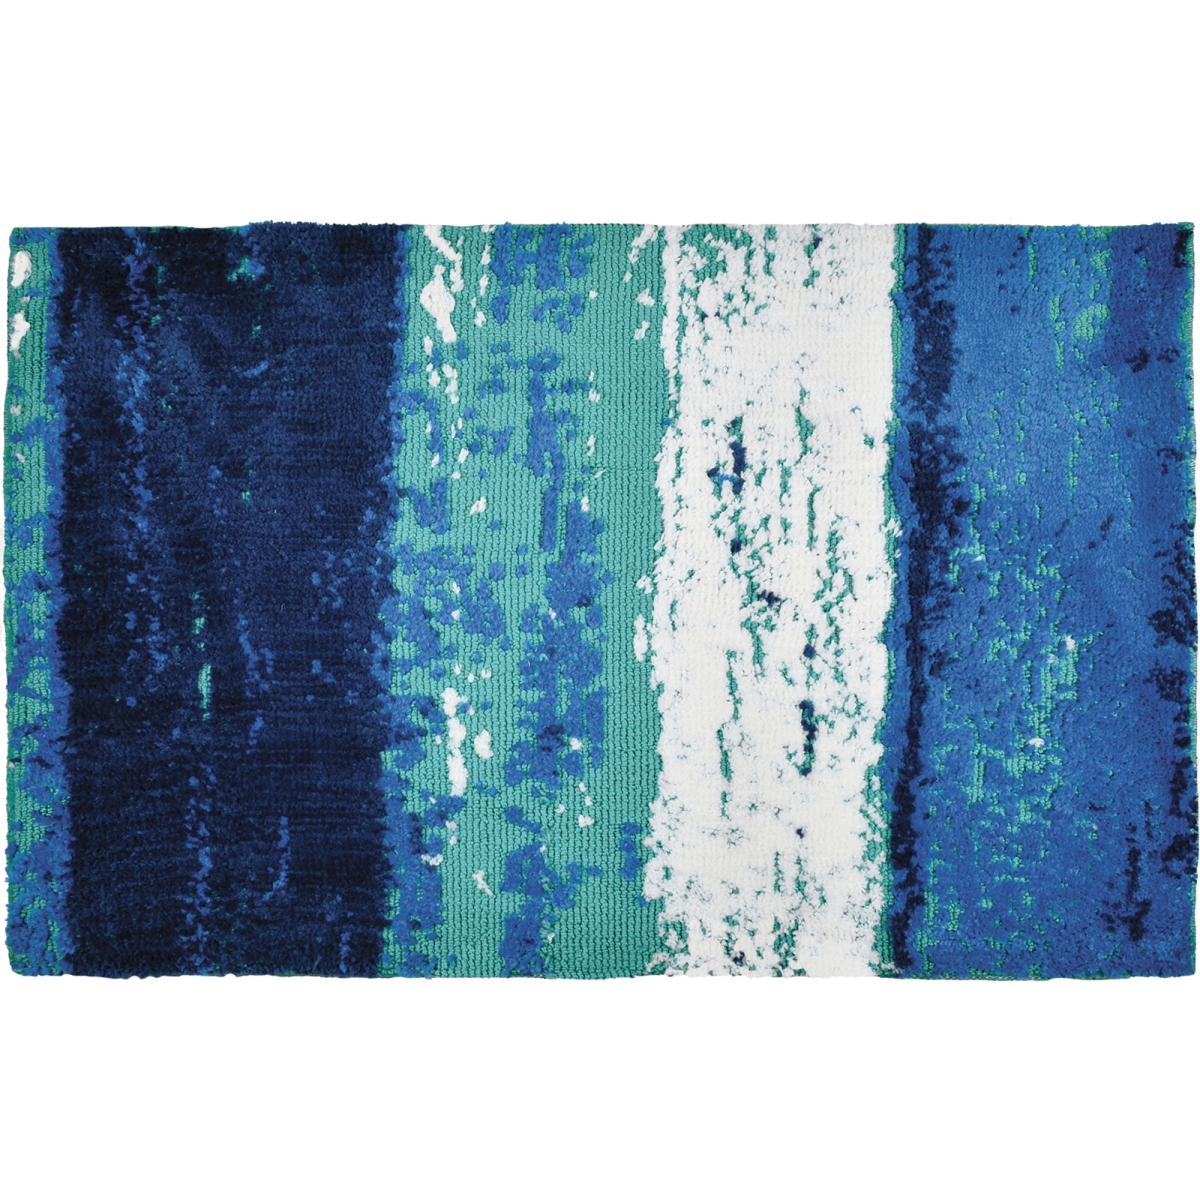 Ss-gsg001b 21 X 33 In. Blue Skies Accent Rug